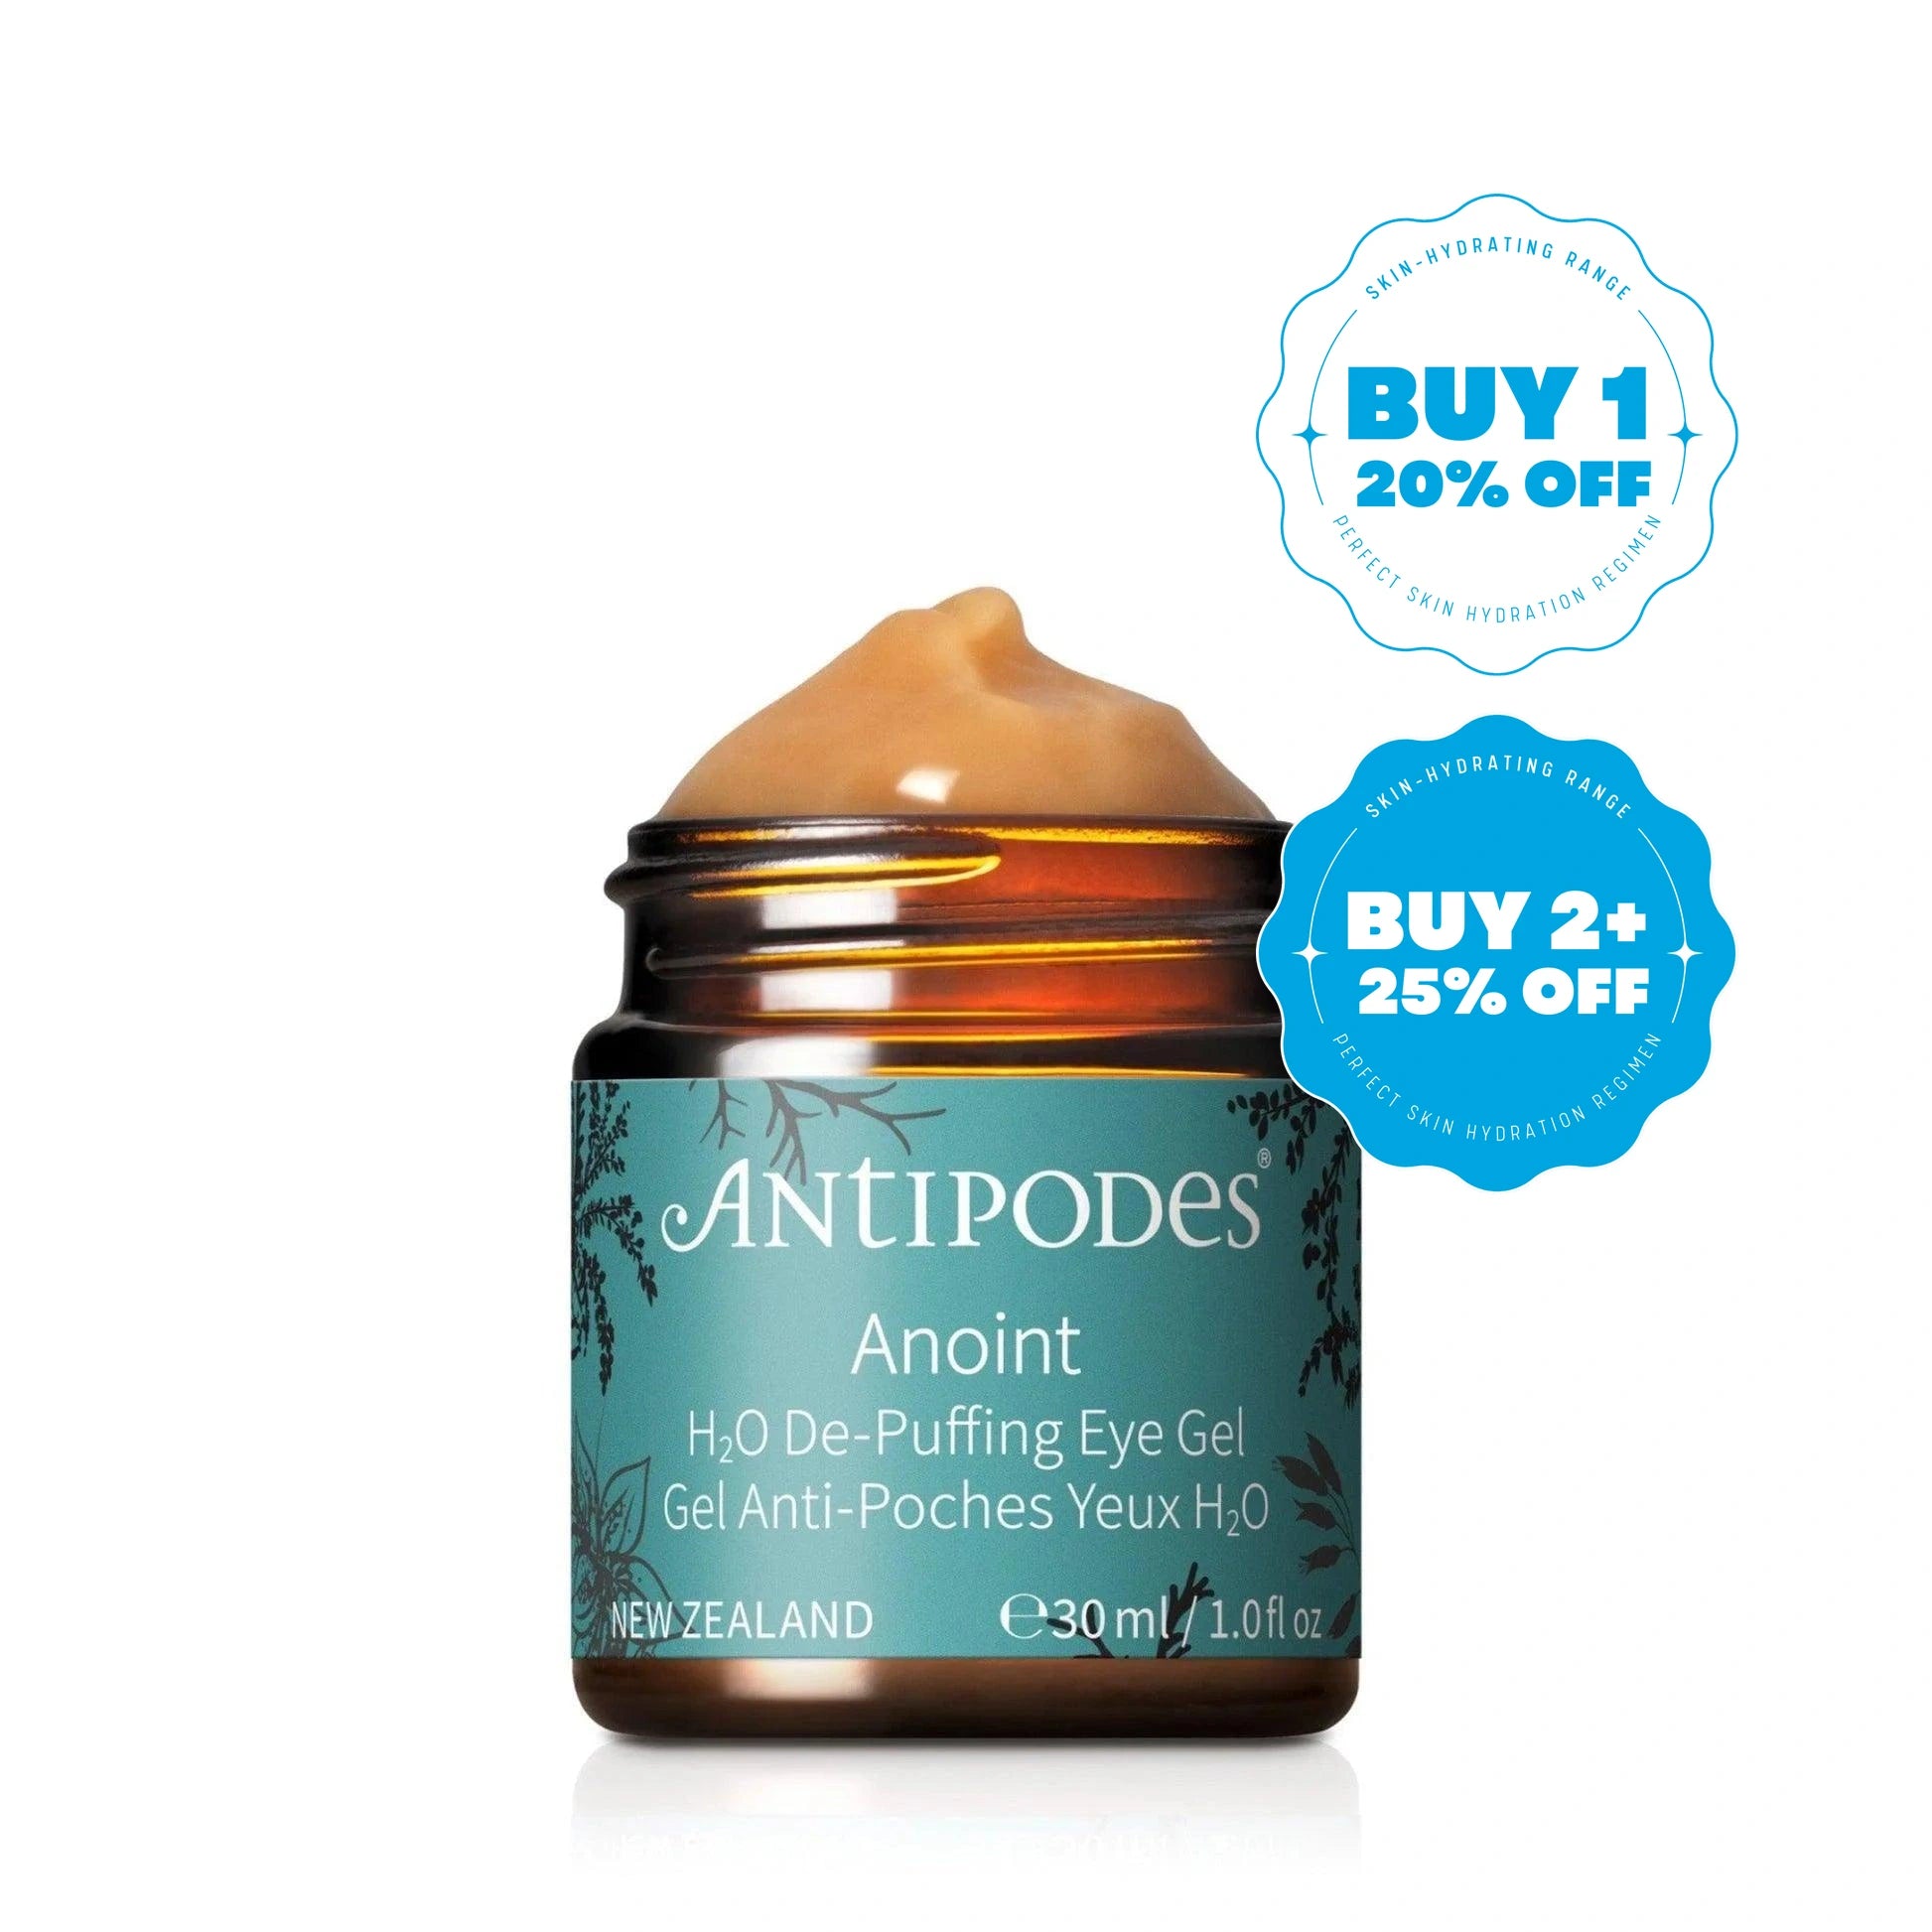 Antipodes Anoint H2O De-Puffing Eye Gel 30ml by Love Nature